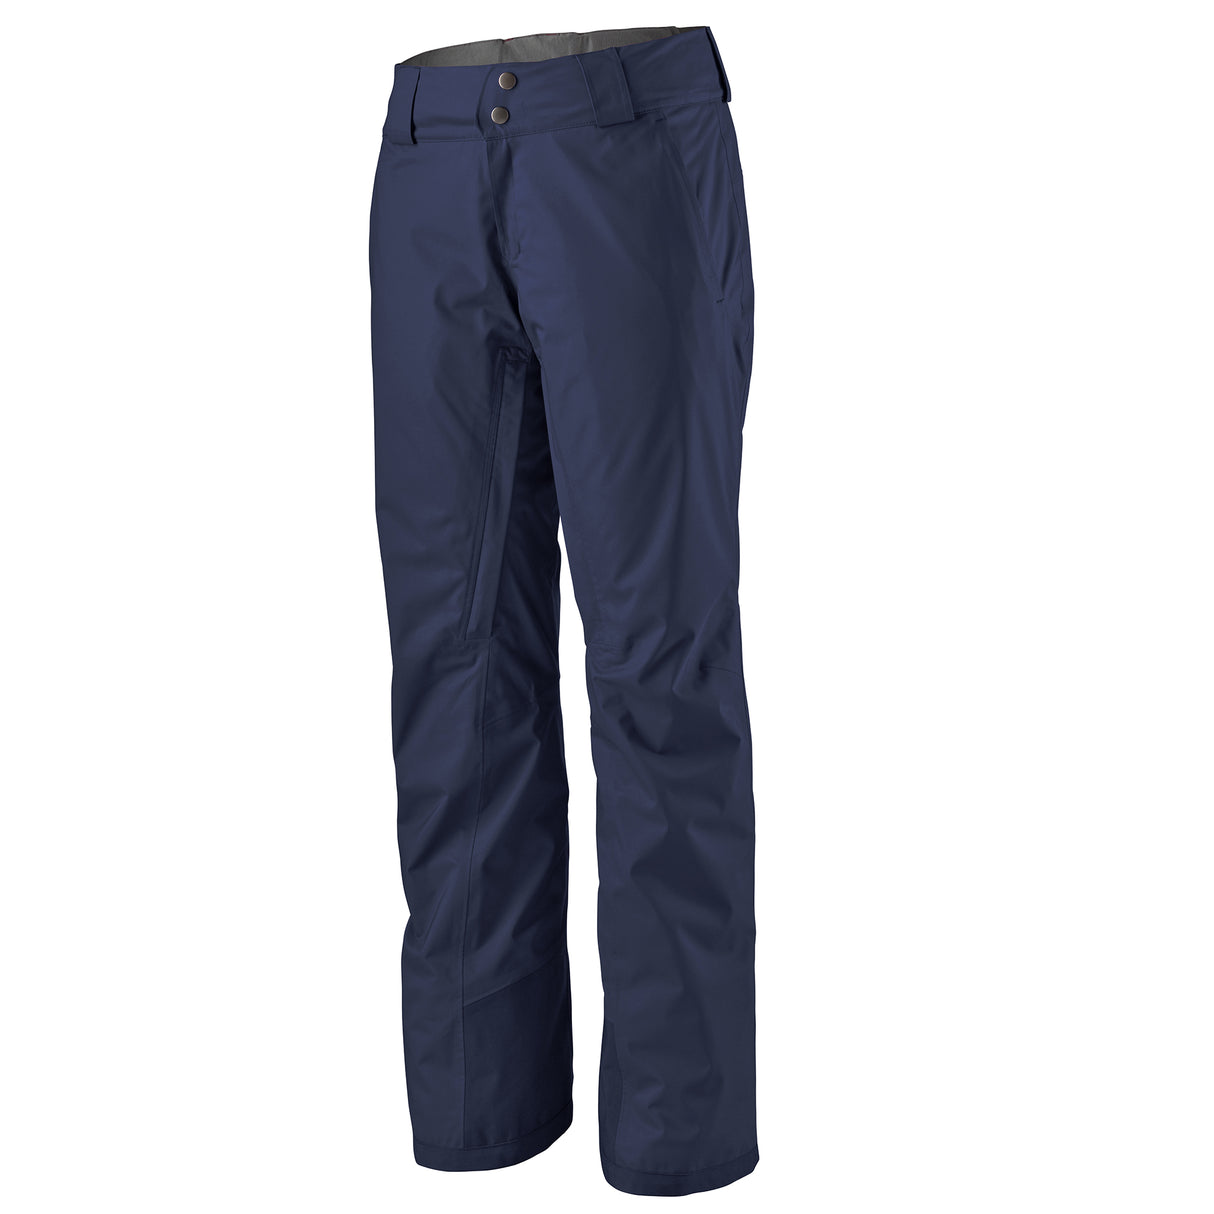 Insulated Snowbelle Pant